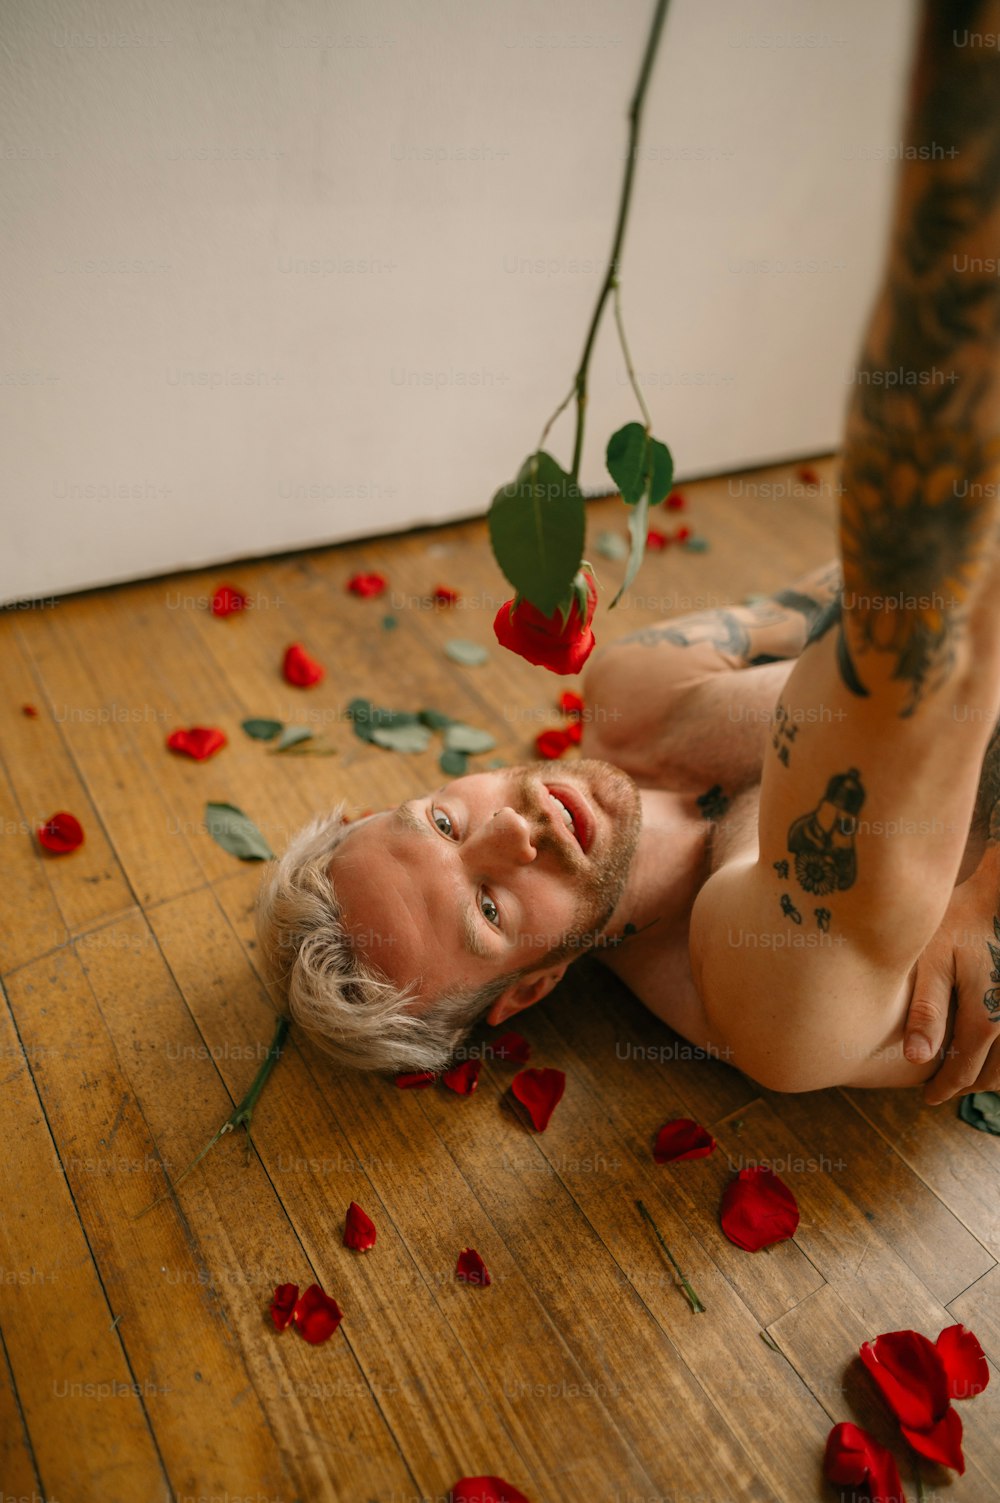 a person lying on the floor with red and green objects on the floor